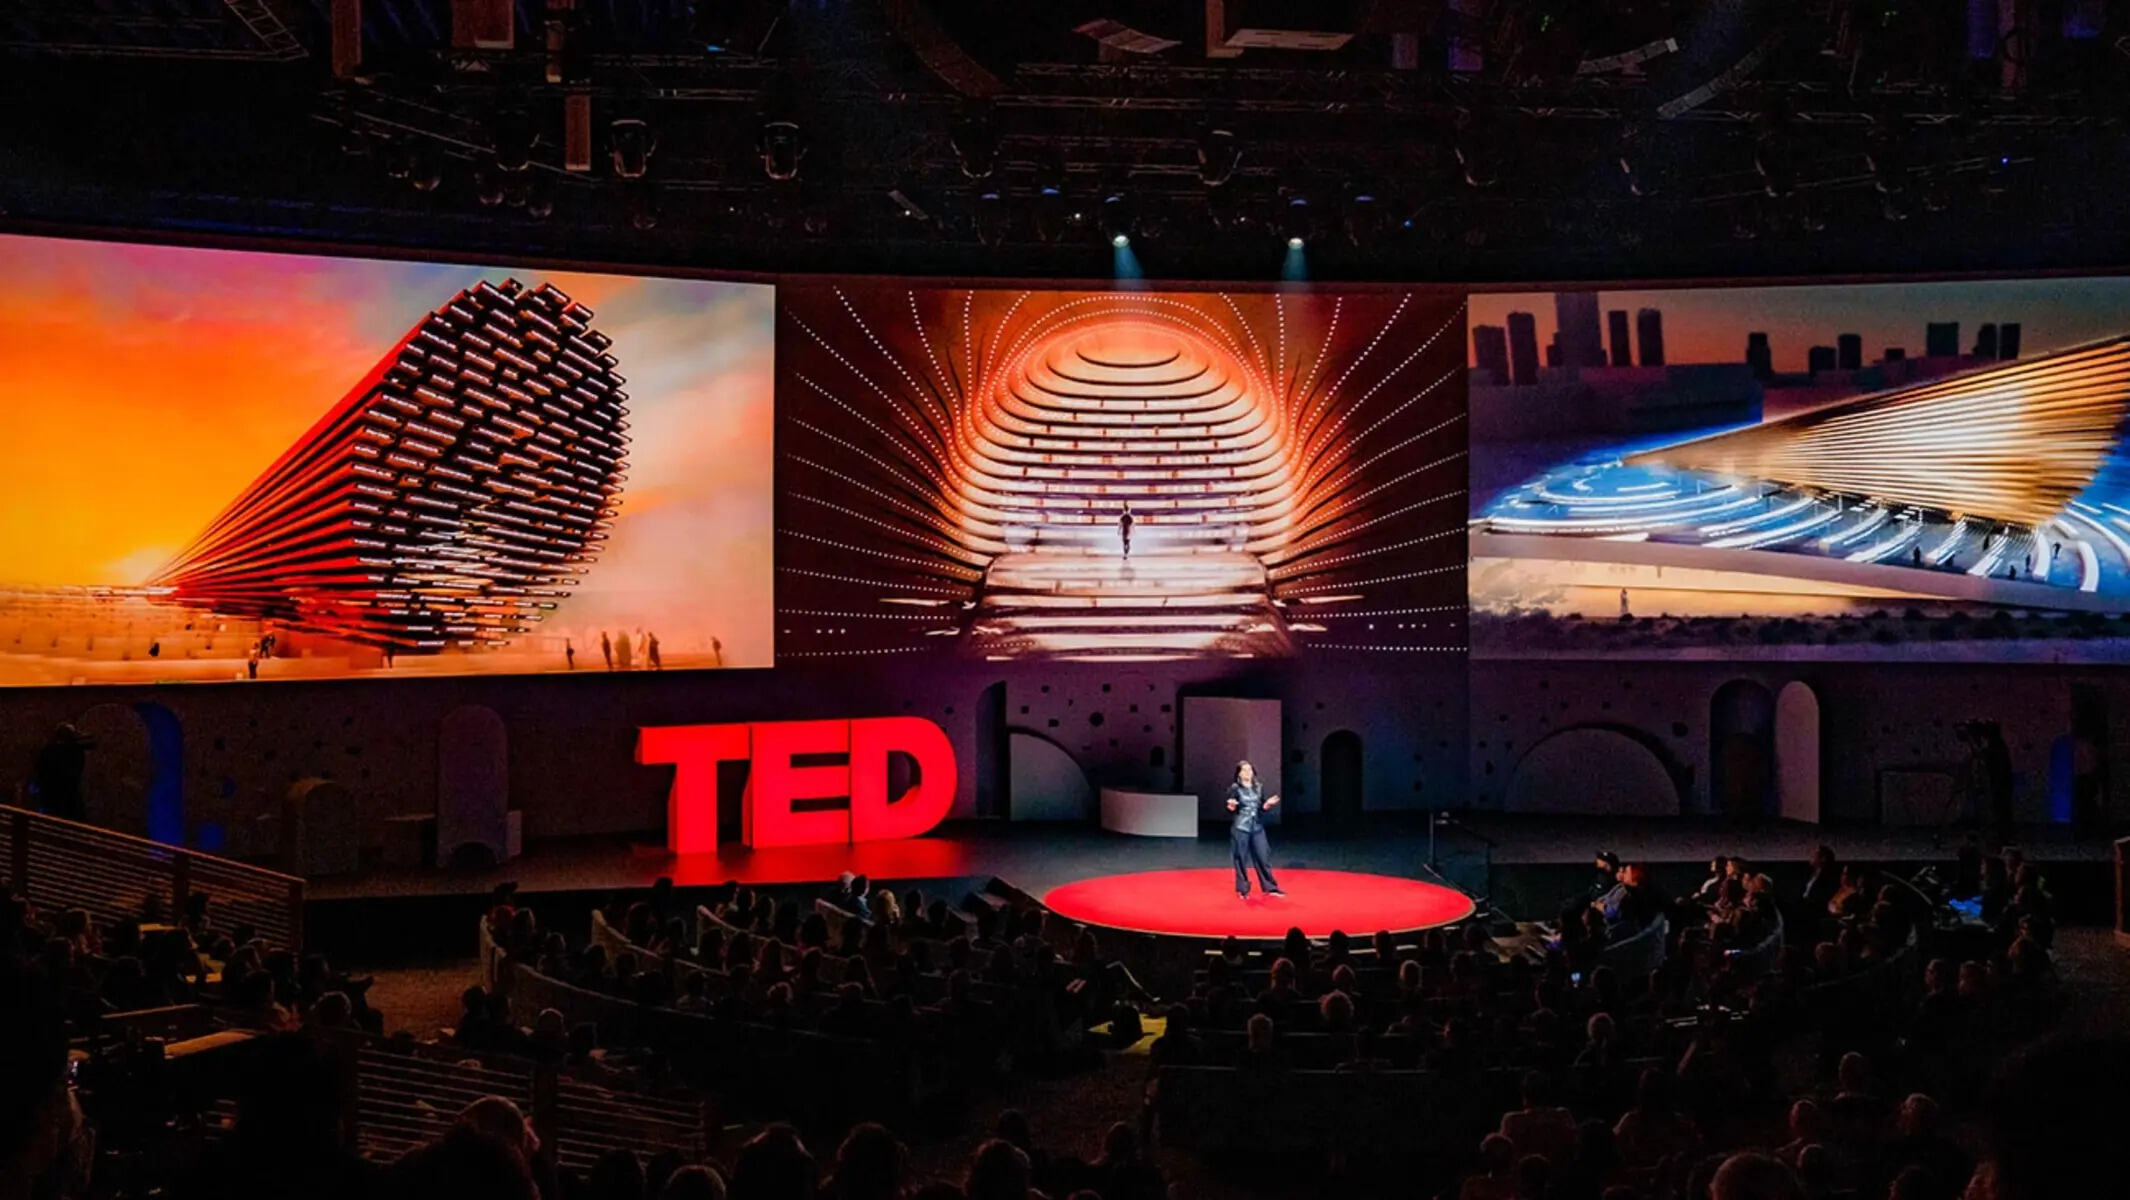 clubhouse-teams-up-with-ted-talks-for-exclusive-content